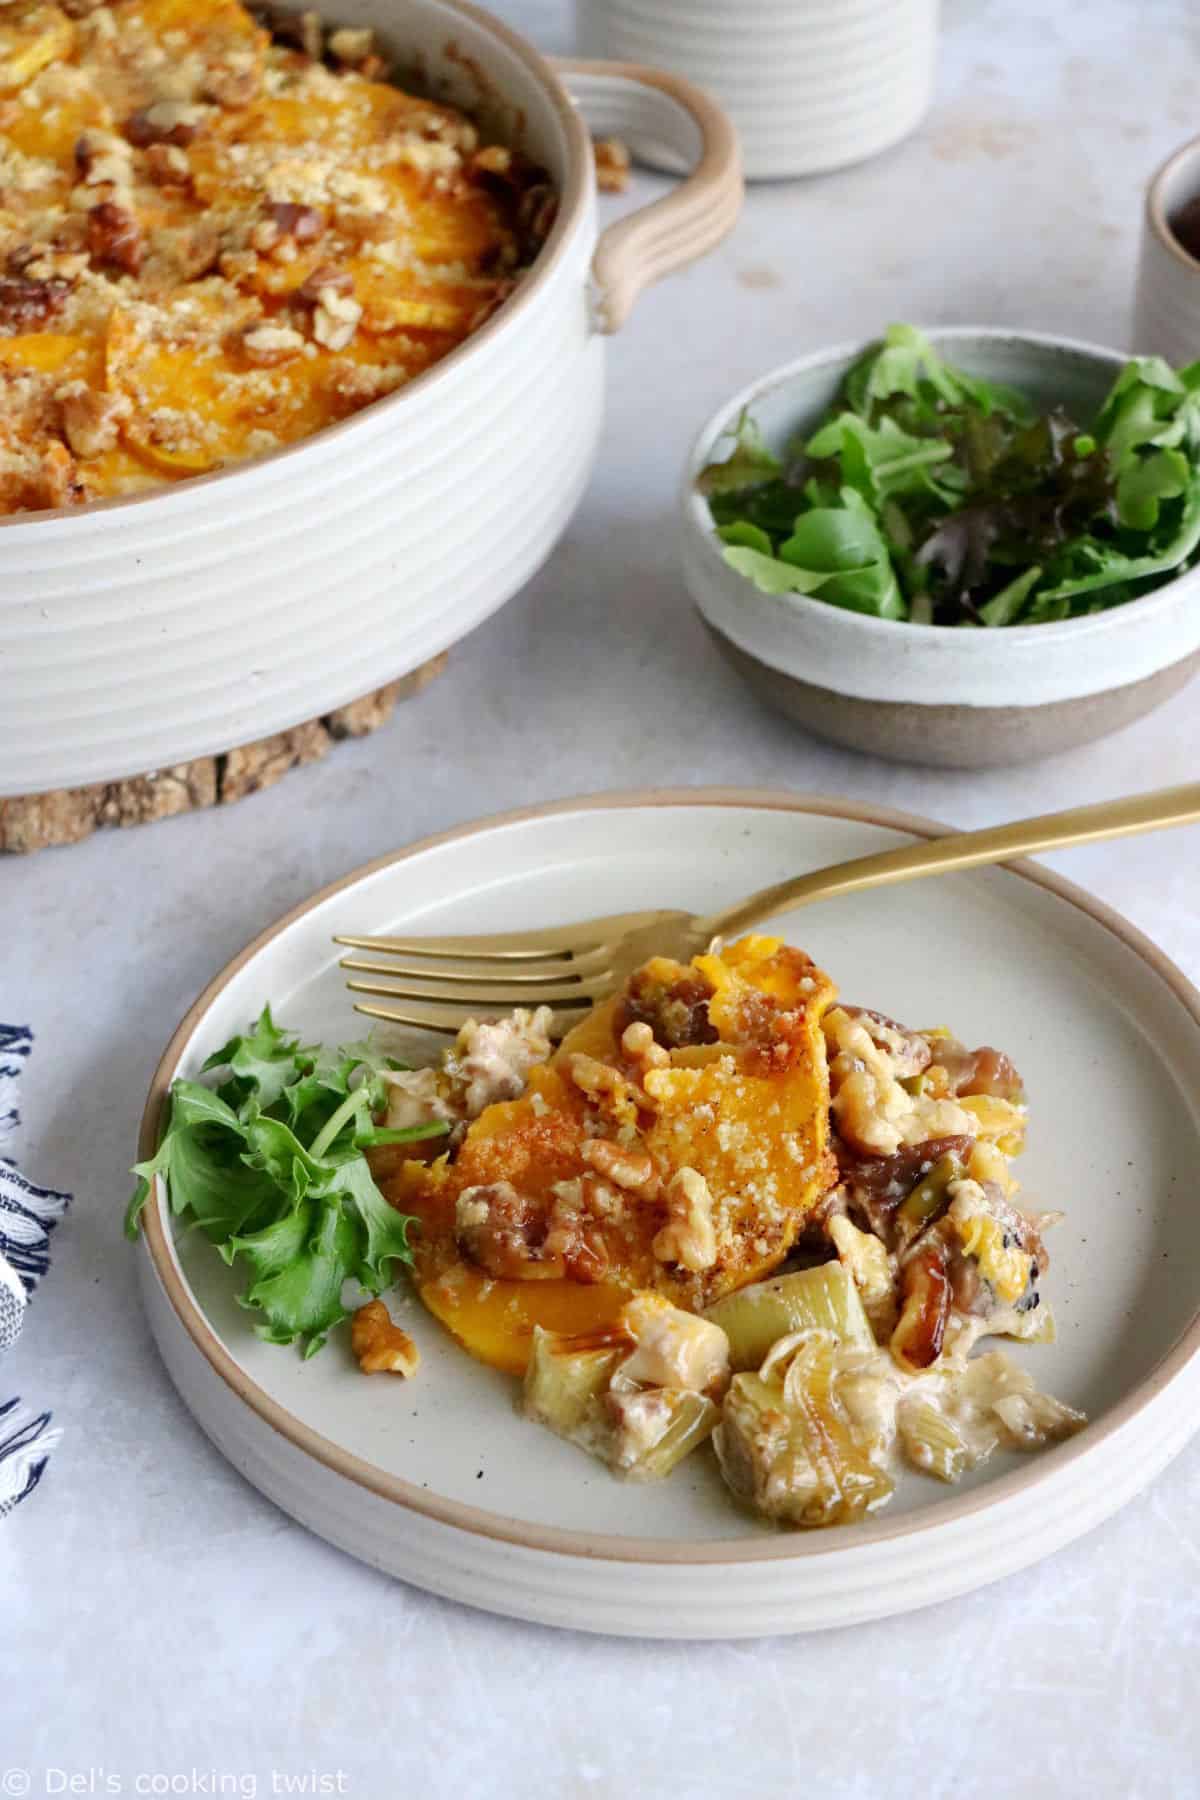 Butternut squash gratin with chestnuts and leeks makes a wonderful side or vegetarian main for the holidays or any other occasion during the cold season.